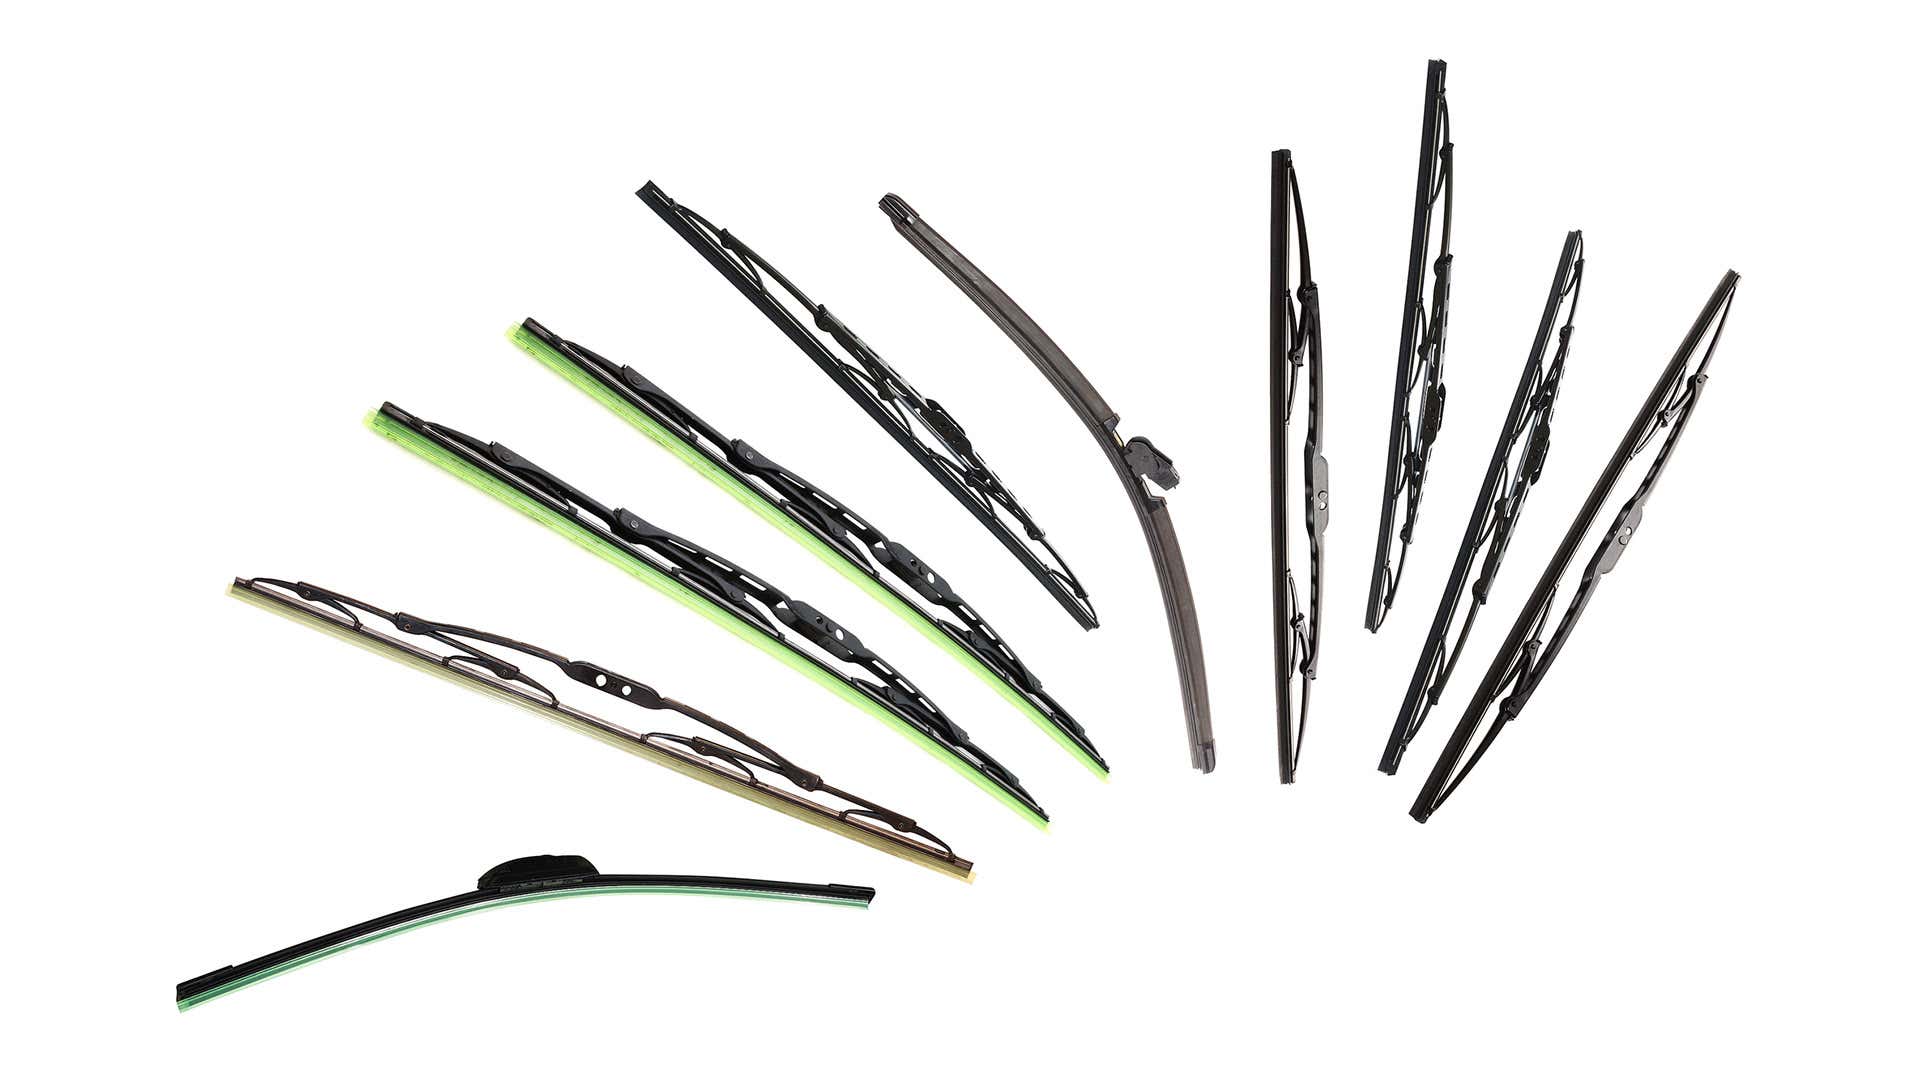 Wiper blade types include conventional, beam, and hybrid.